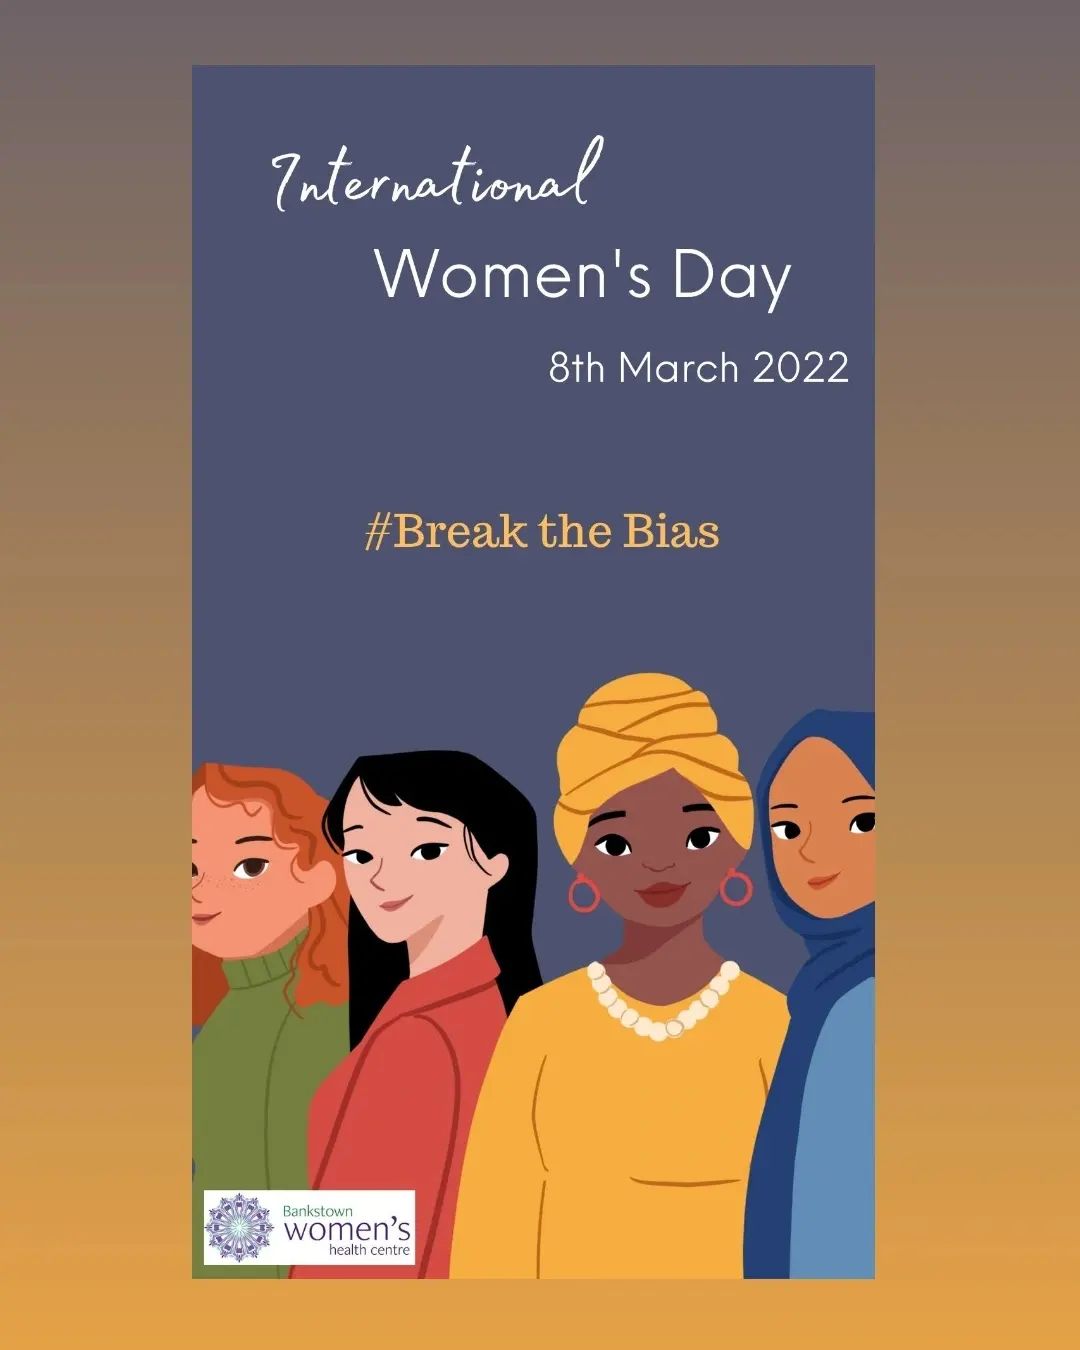 2022: IWD theme #Breakthebias 

Reposting from https://www.internationalwomensday.com - 

" Imagine a gender equal world. 

A world free of bias, stereotypes and discrimination.

 A world that's diverse, equitable, and inclusive. 

A world where difference is valued and celebrated. 

Together we can forge women's equality. 

Collectively we can all "

 #breakthebias 
#breakthebias2022
#womenshealth
#genderequality
#enddiscrimination